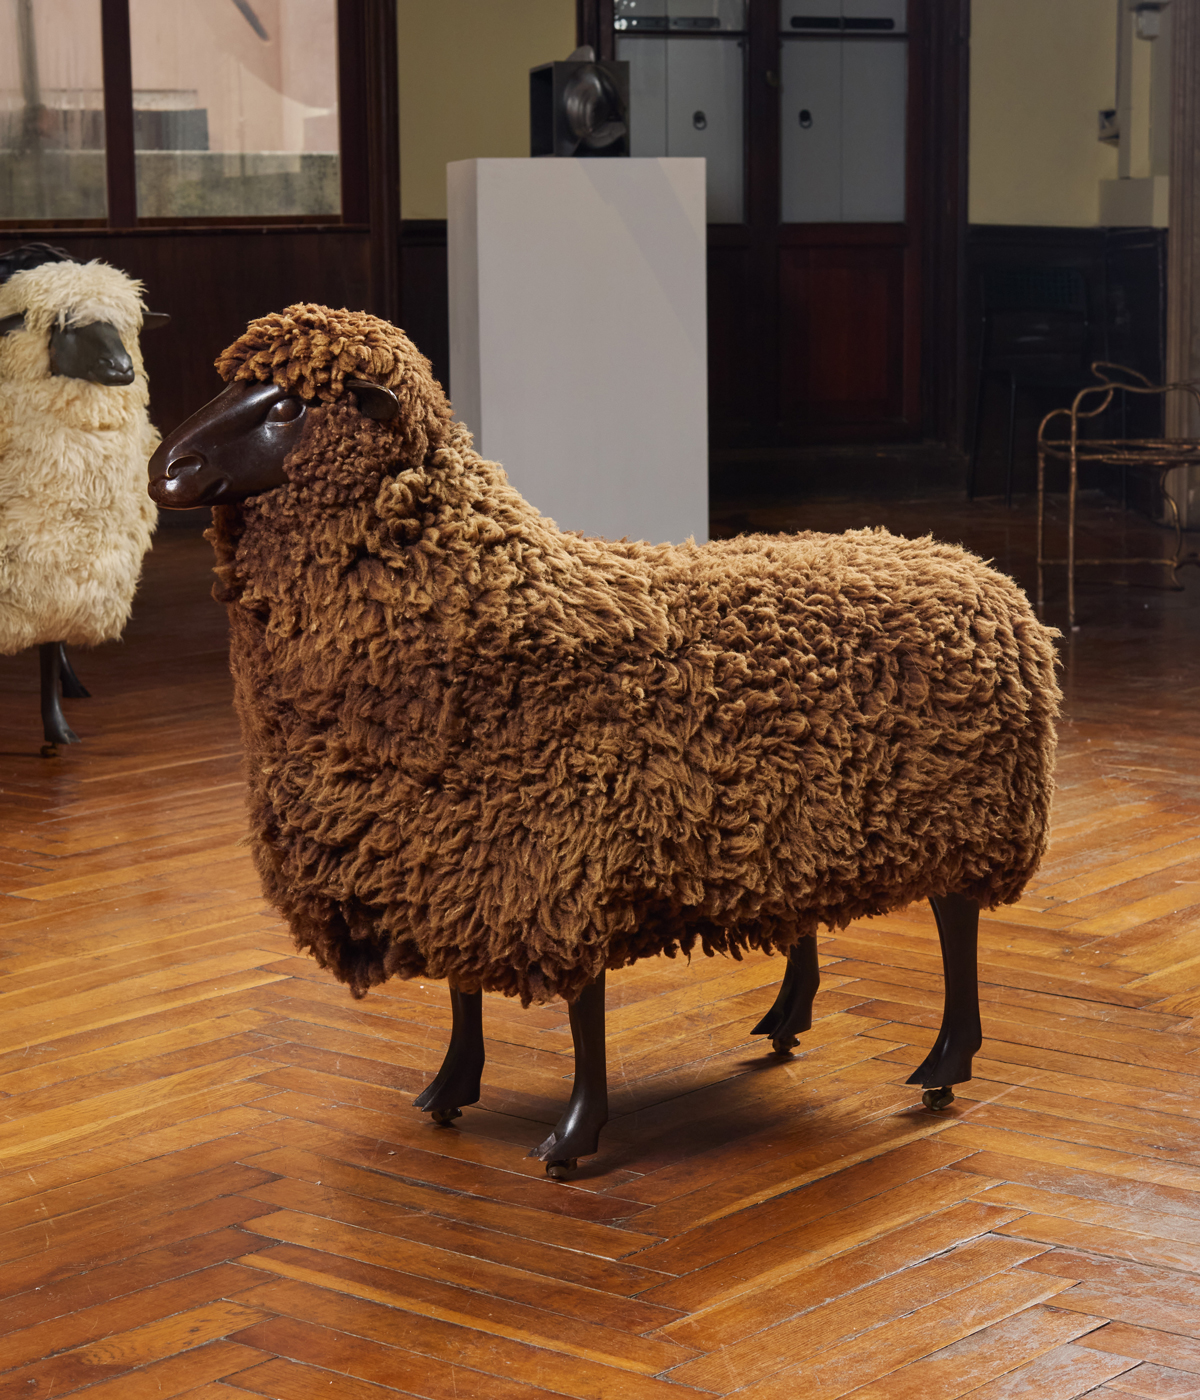 sheep sculpture in palace